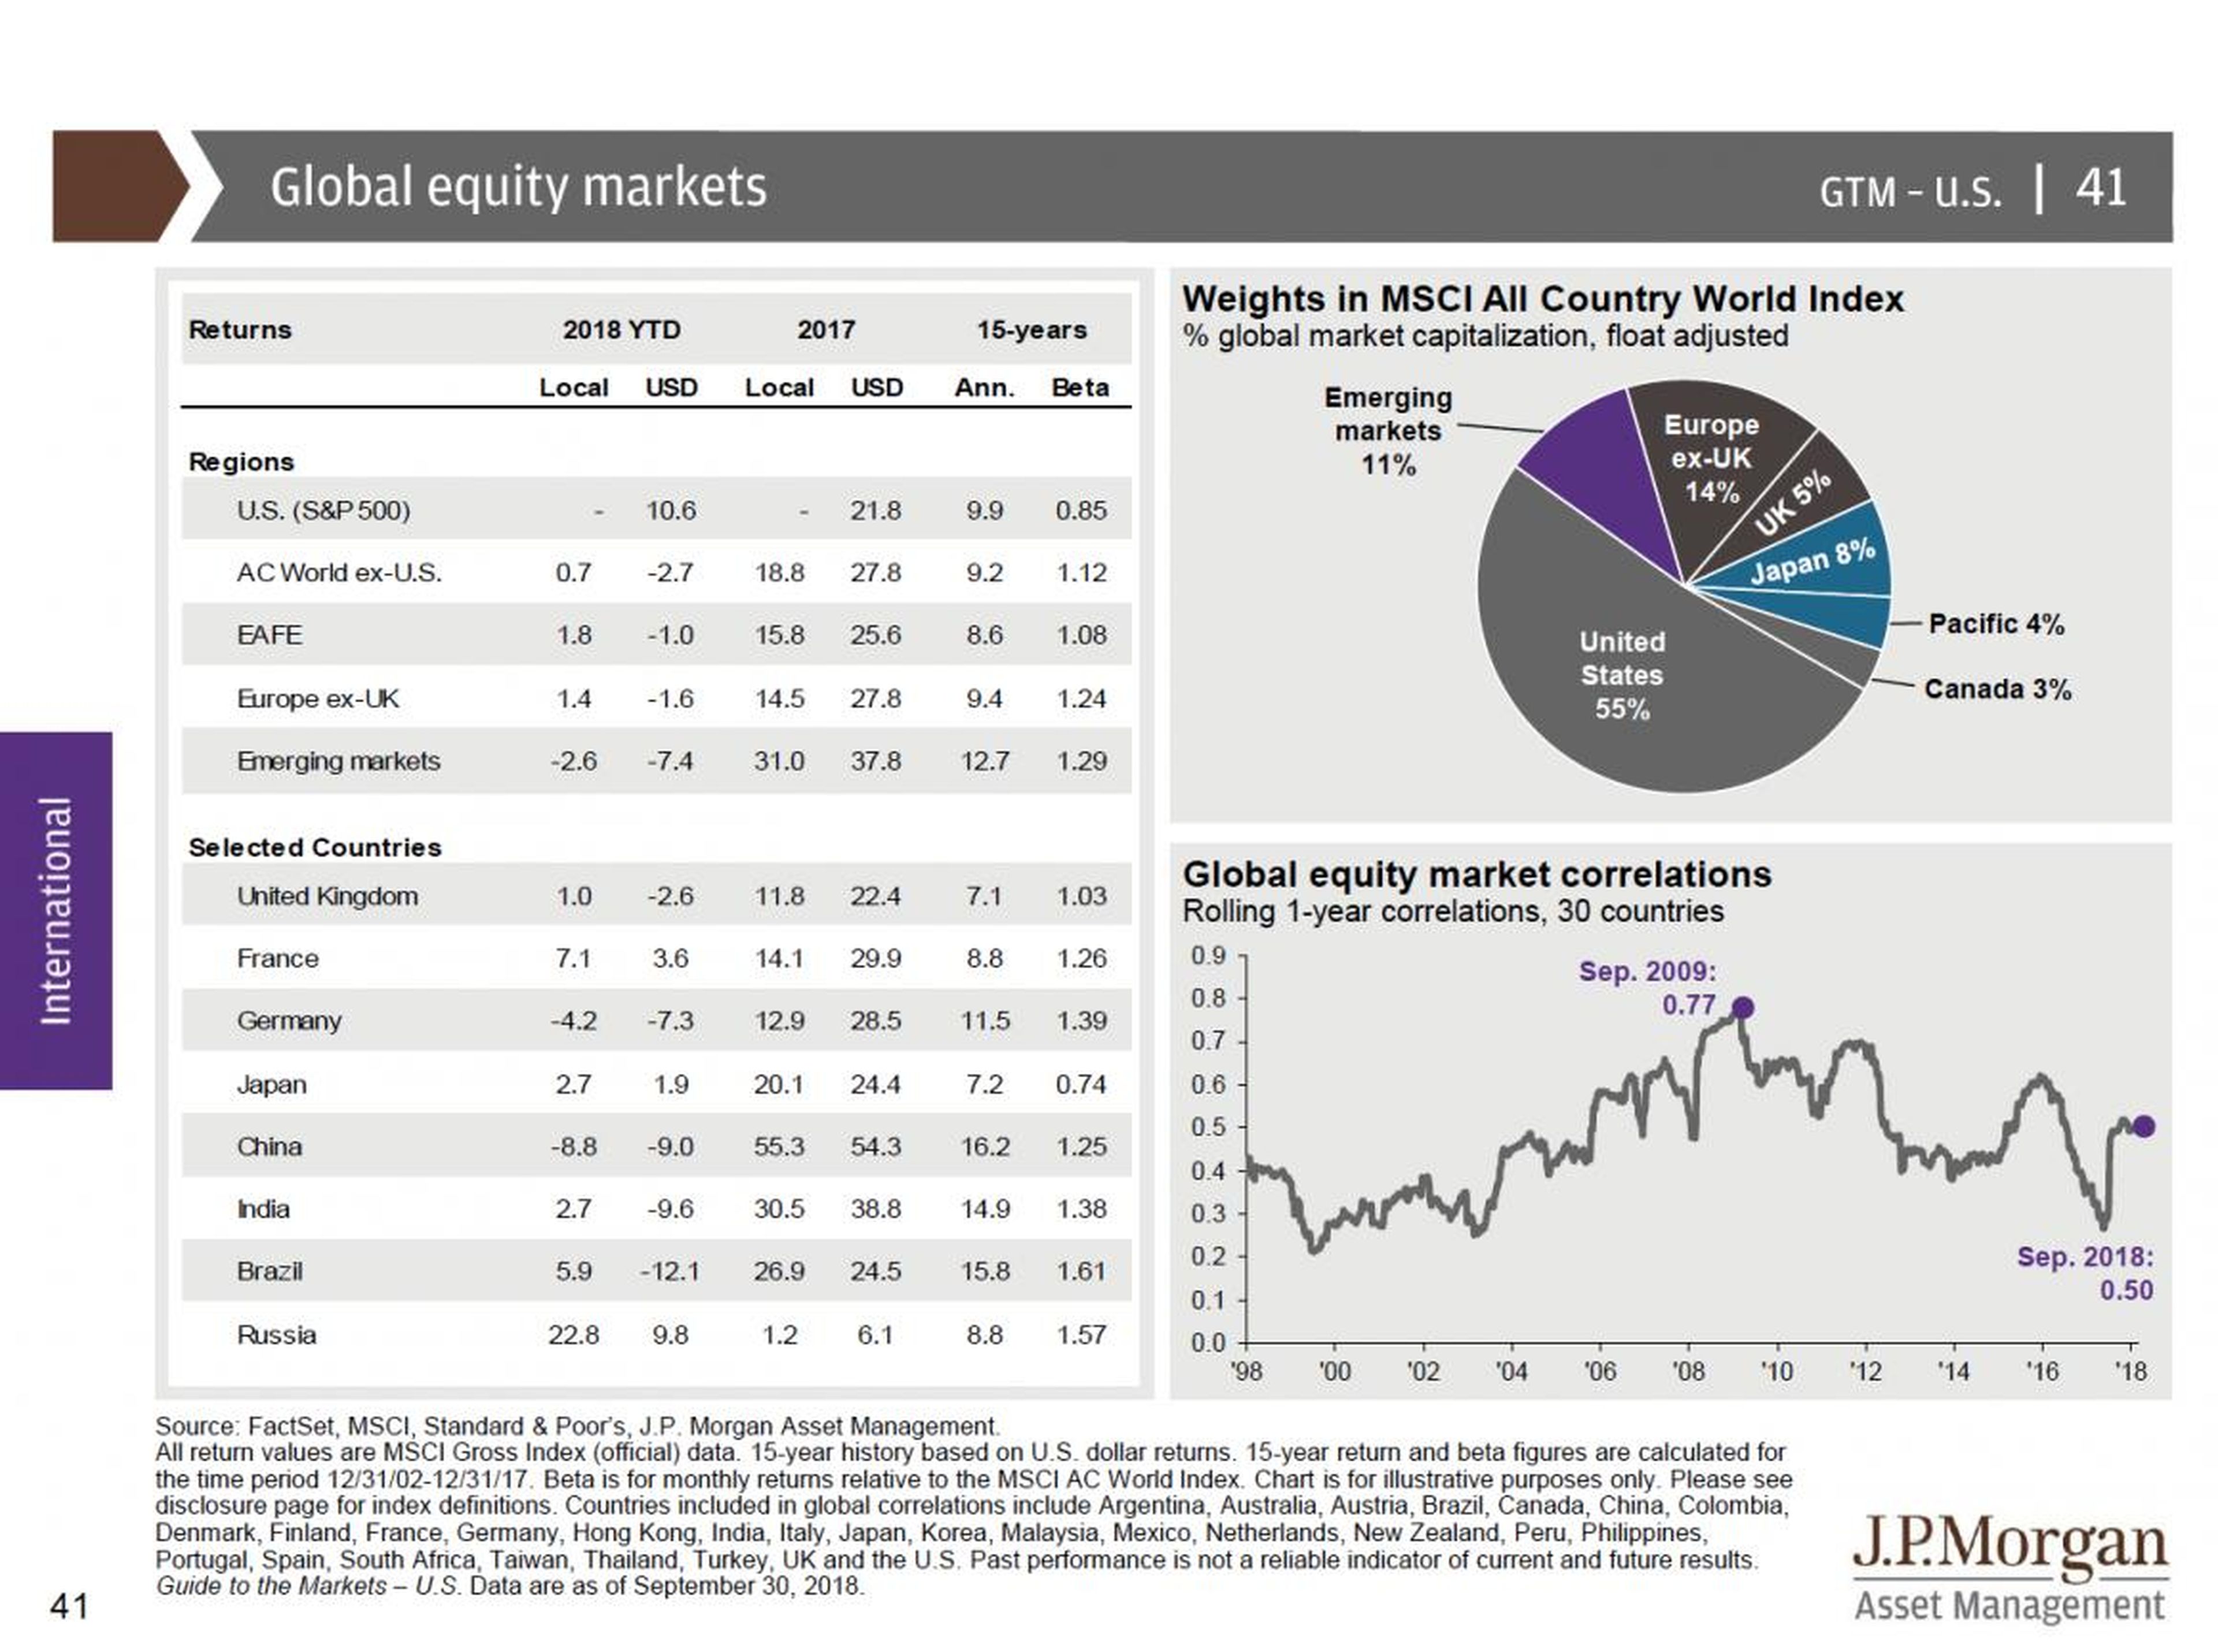 JPMorgan's ultimate guide to markets and the economy